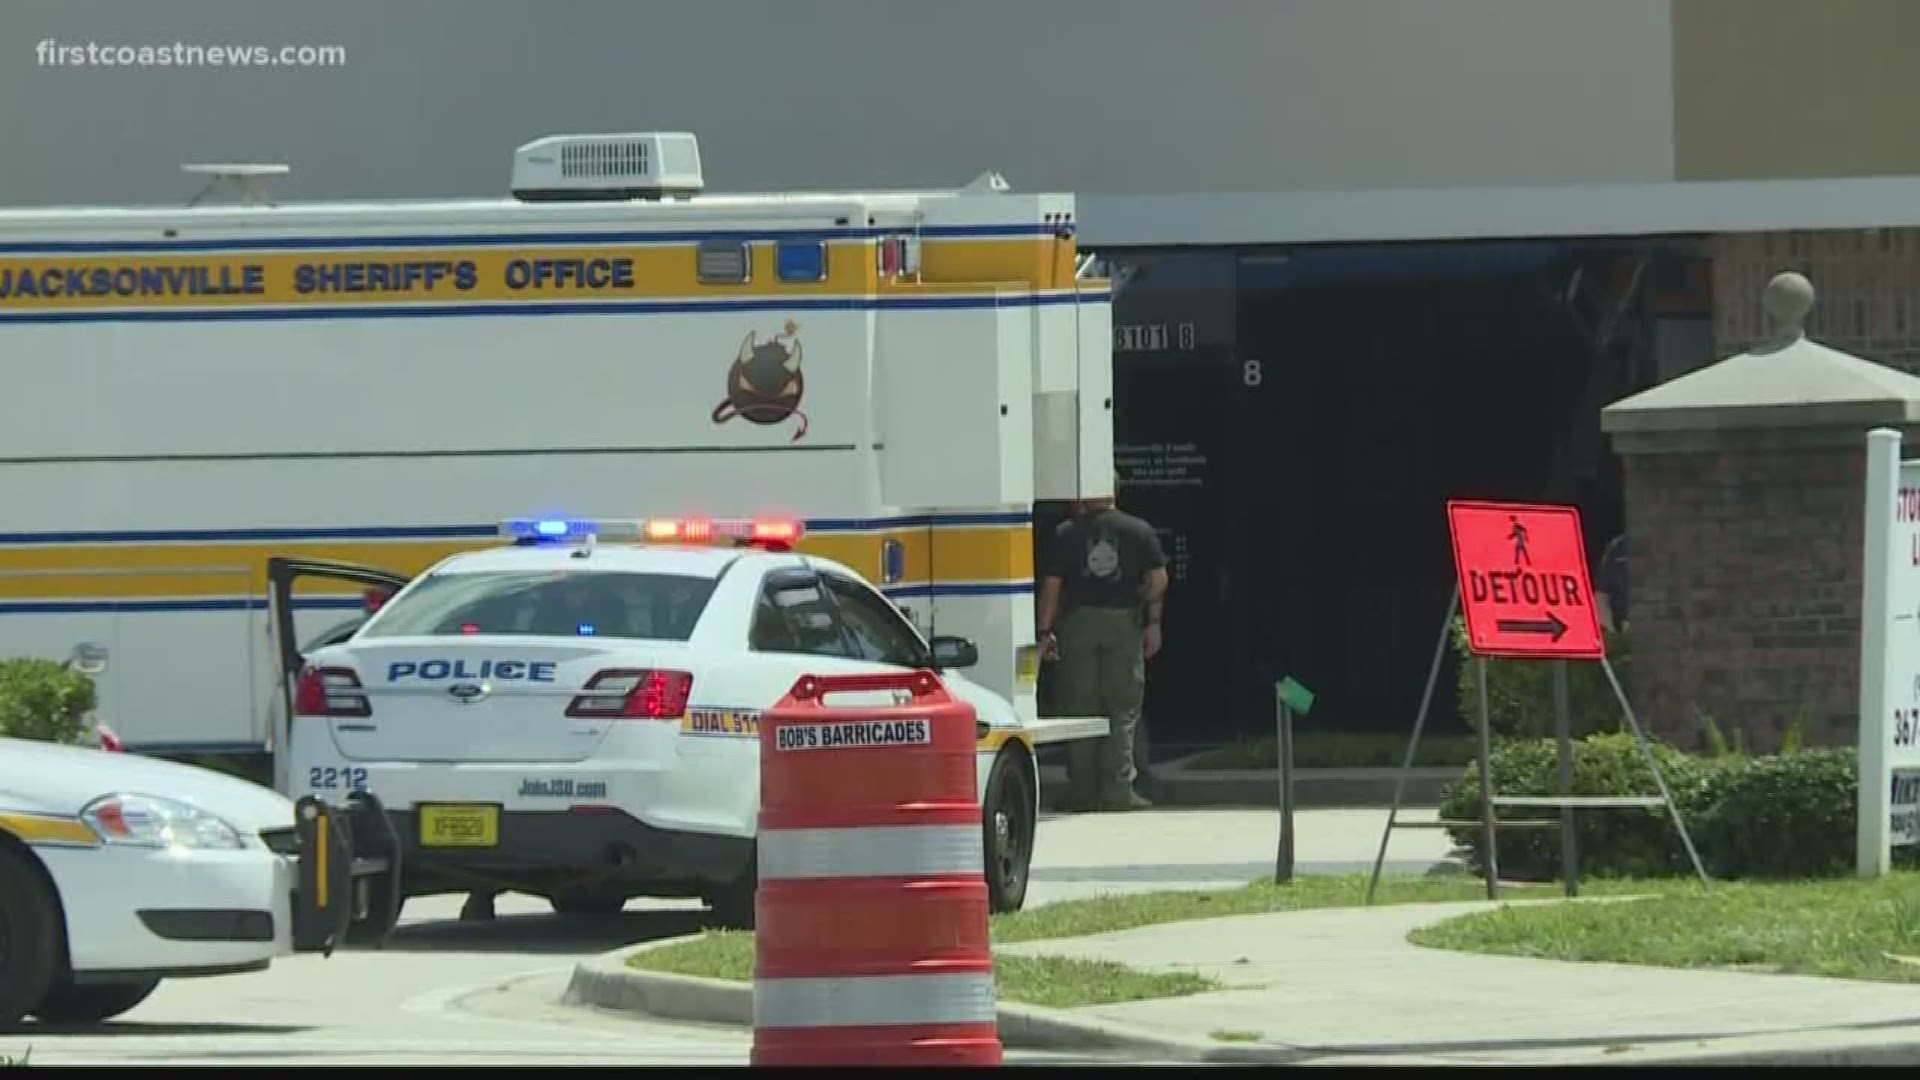 FCN On Your Side's Ken Amaro looks into a scary situation that occurred Tuesday when Goodwill workers found a package with grenades inside donated to the charity.